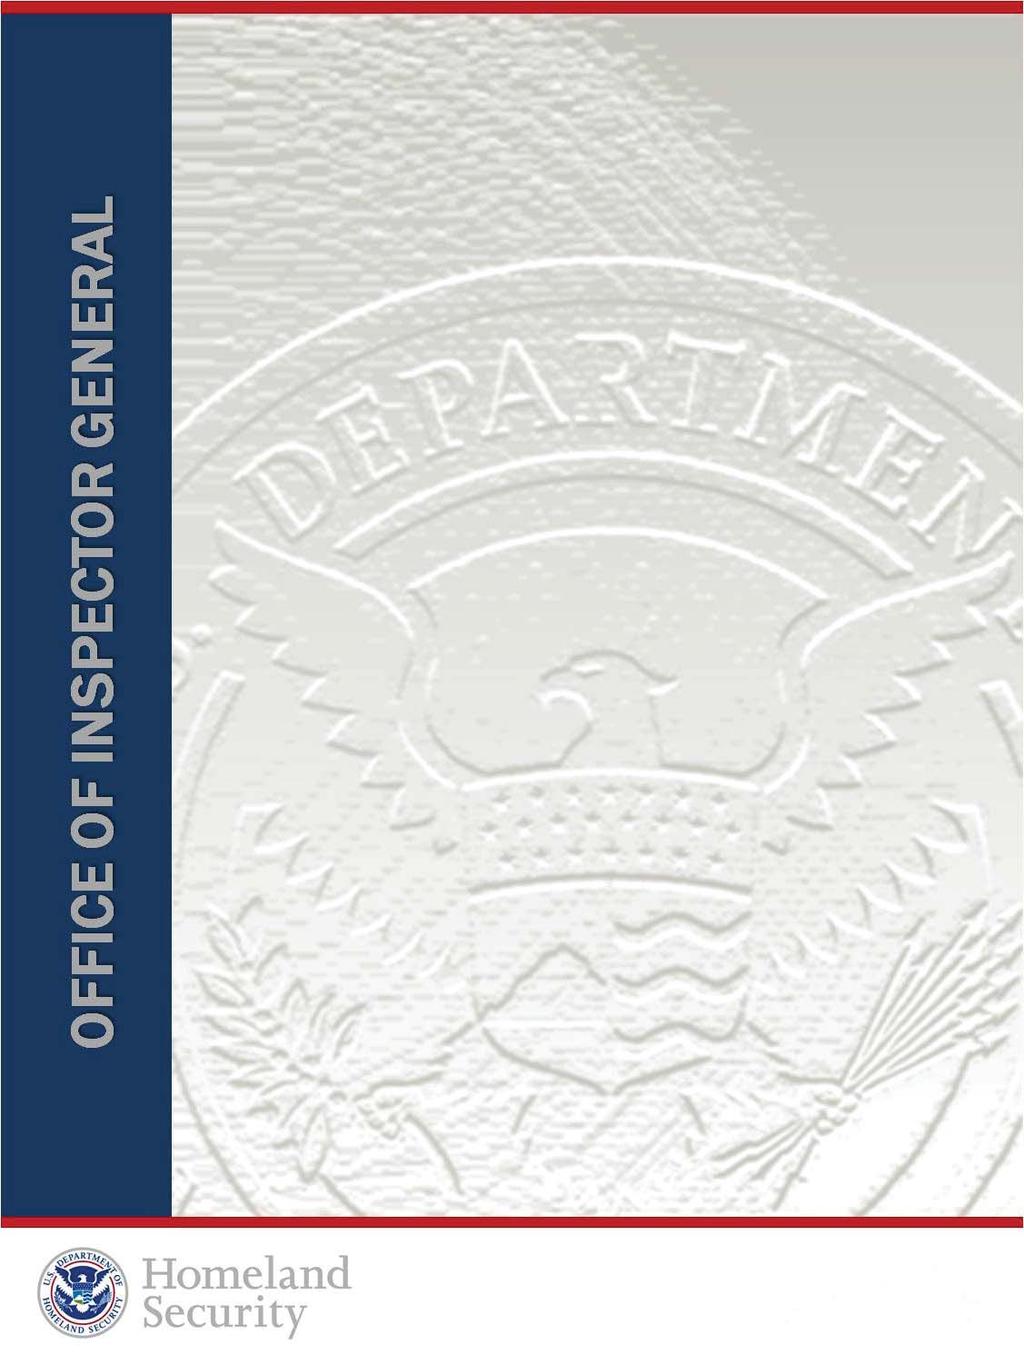 ICE Field Offices Need to Improve Compliance with Oversight Requirements for